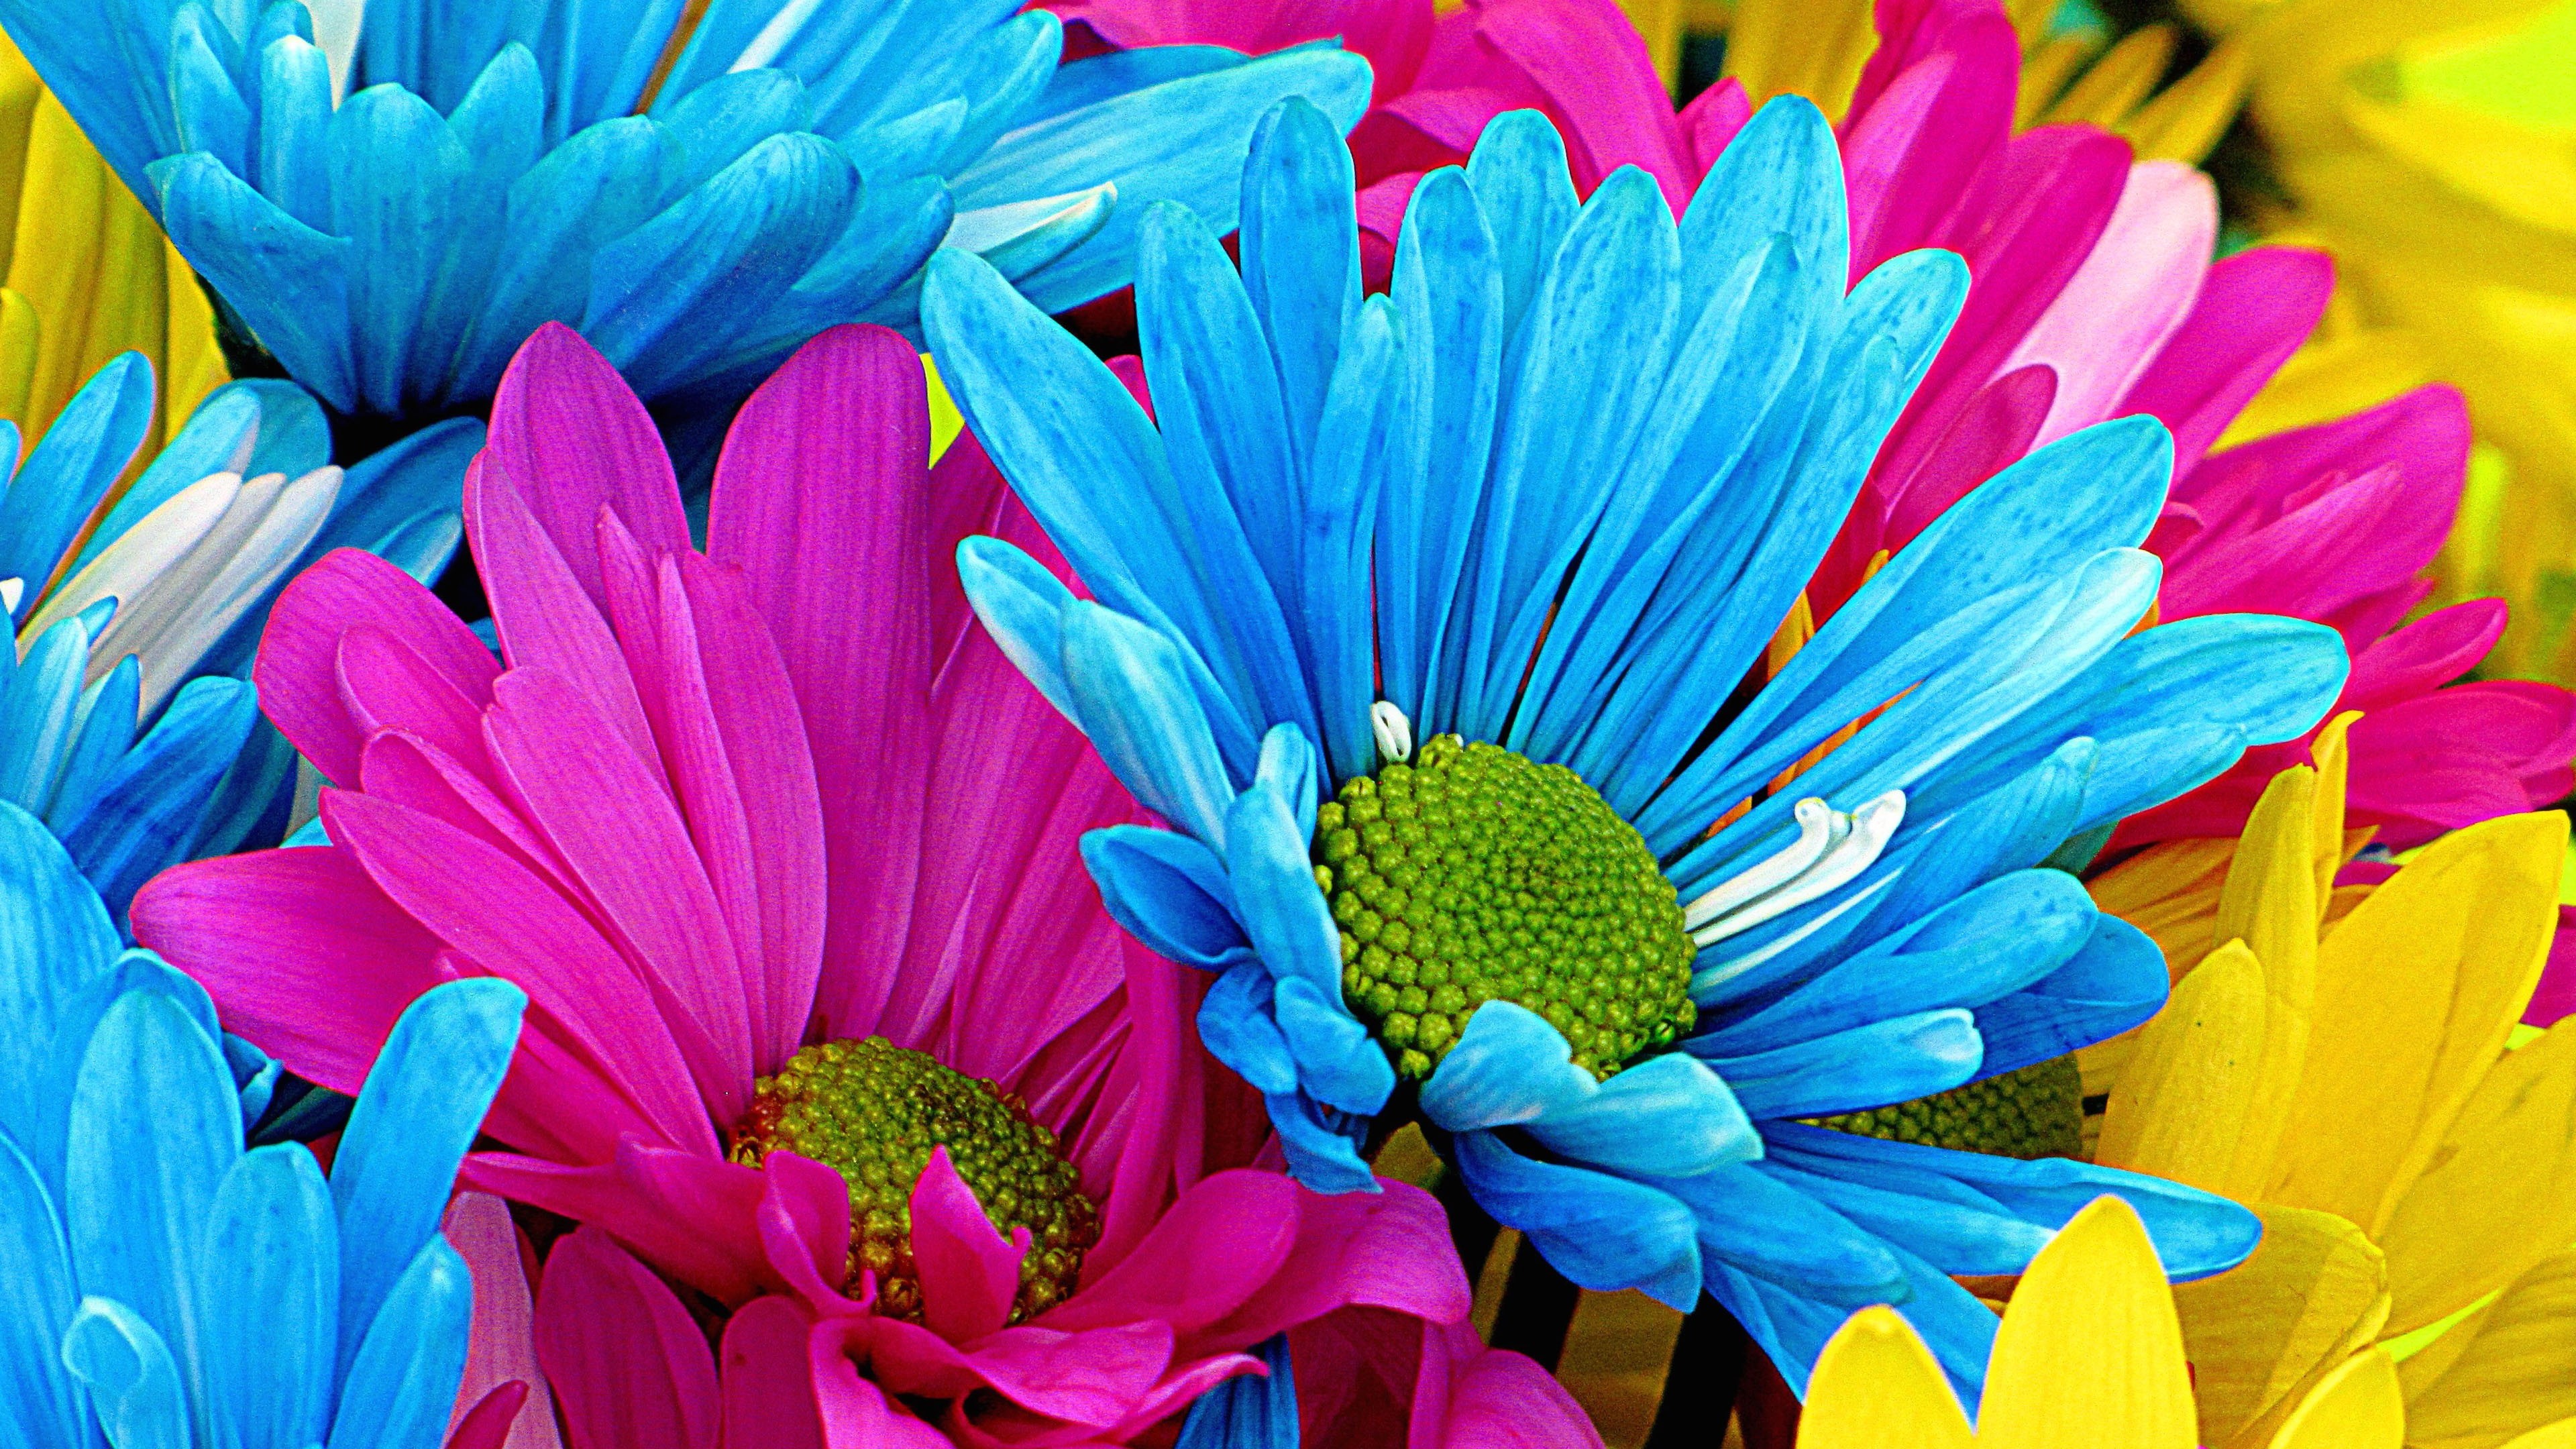 Free Printable Gerbera Daisy Pictures